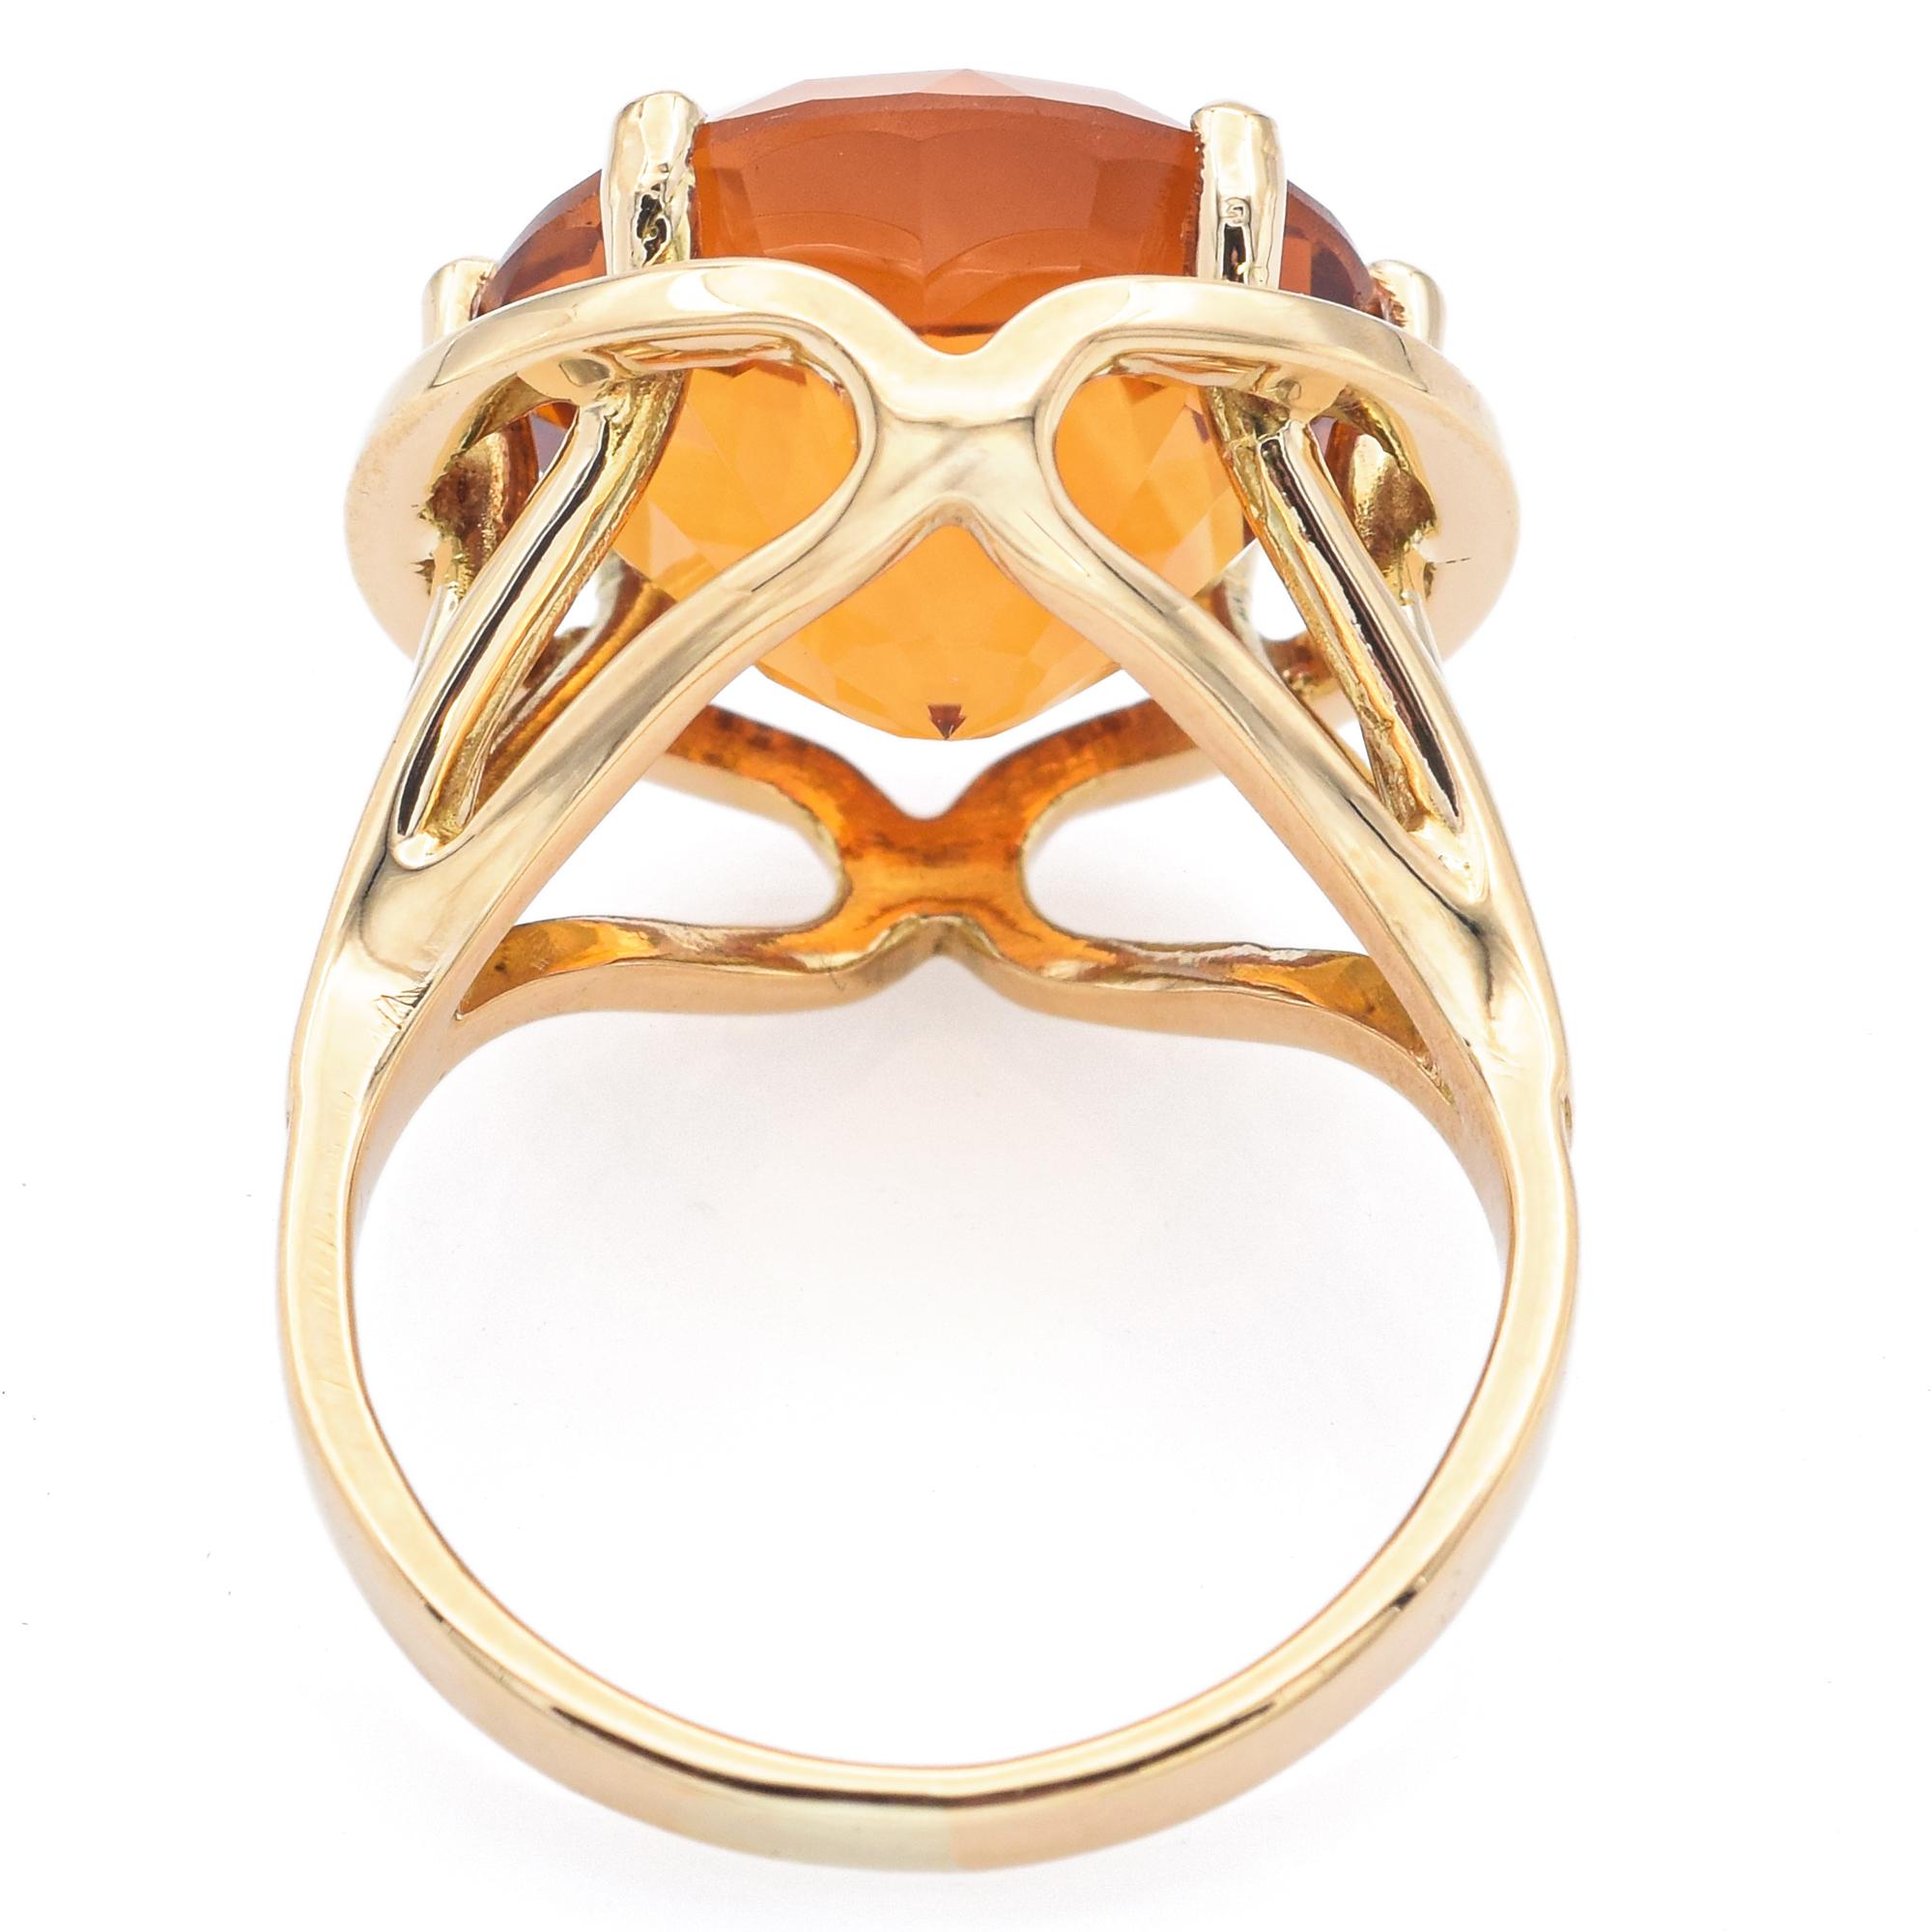 Women's Vintage Carl Bucherer 8.17 Ct Citrine Yellow Gold Ring Size 5.5 with Box